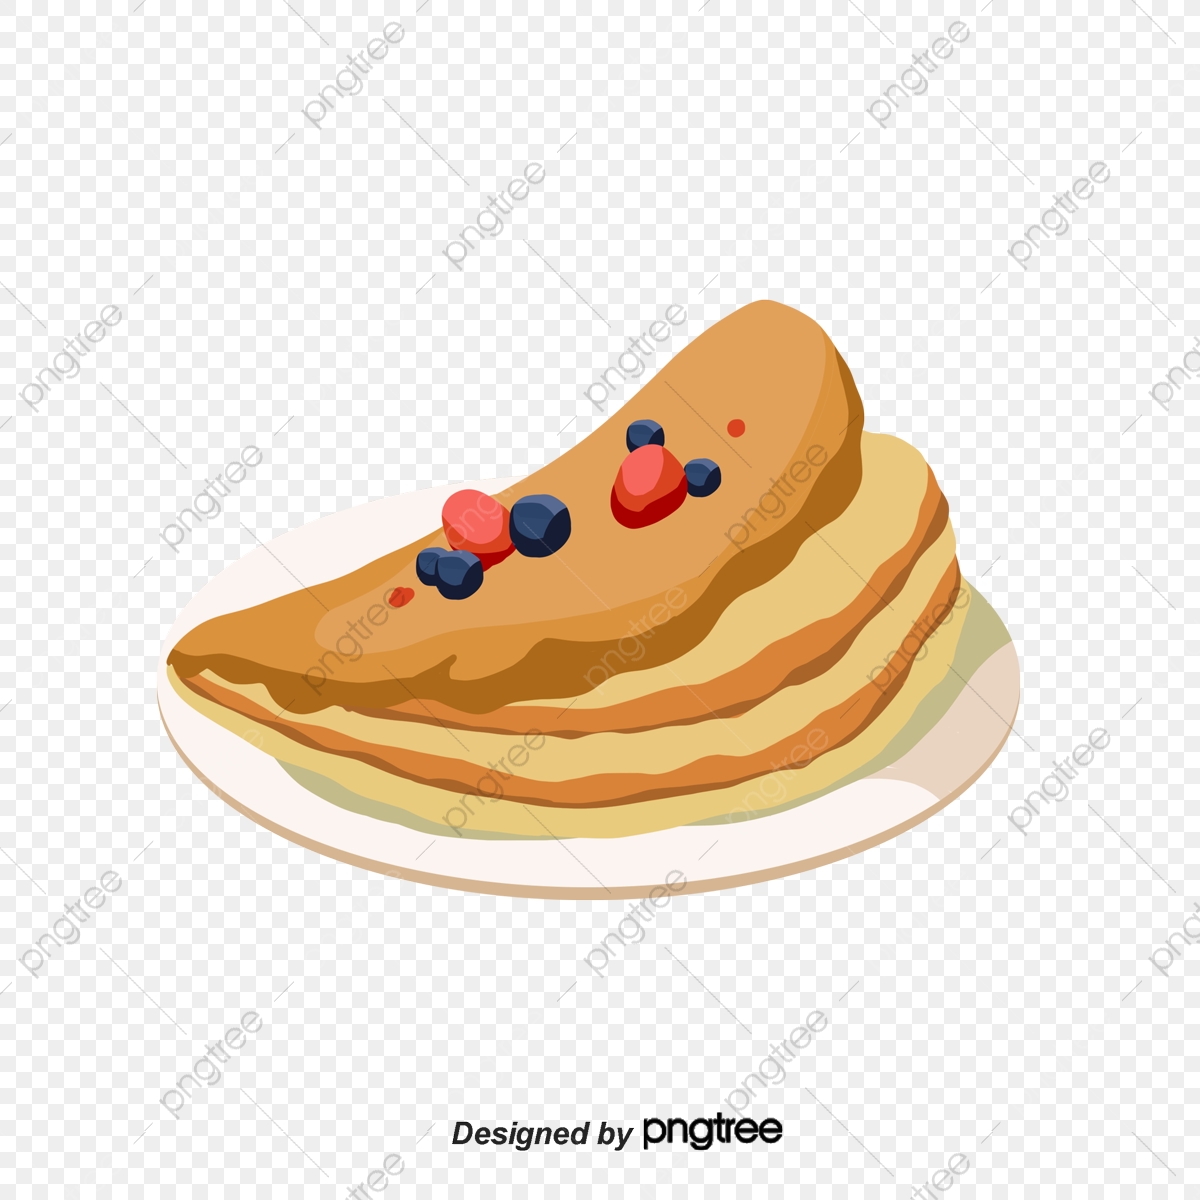 Fruit pancake material . Pancakes clipart covered